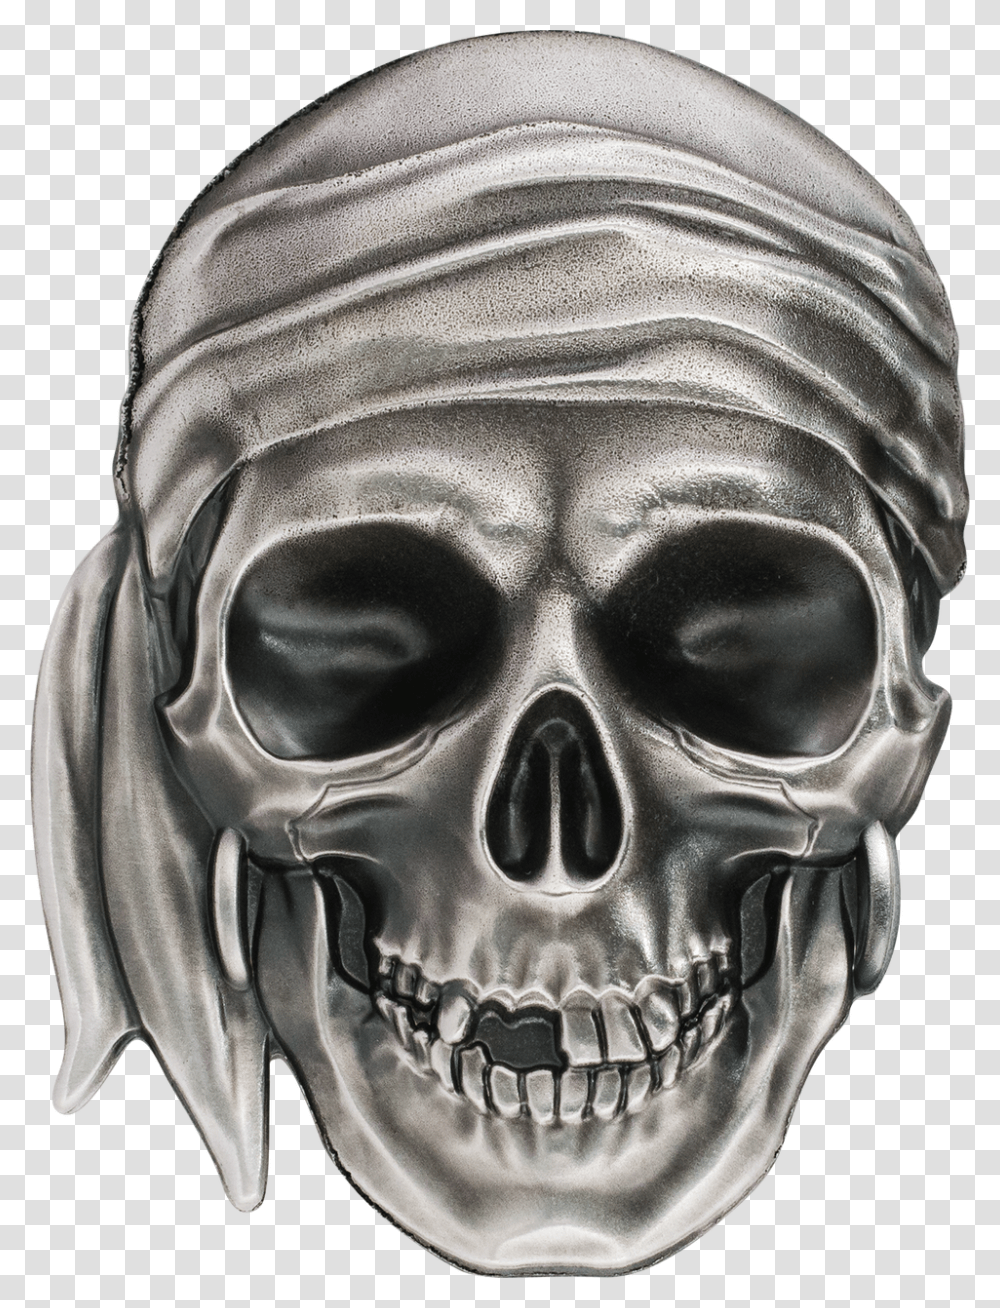 Skulls Pirate Palau 2017 Pirate Skull Antique Finish Silver Coin, Head, Person, Human, Helmet Transparent Png